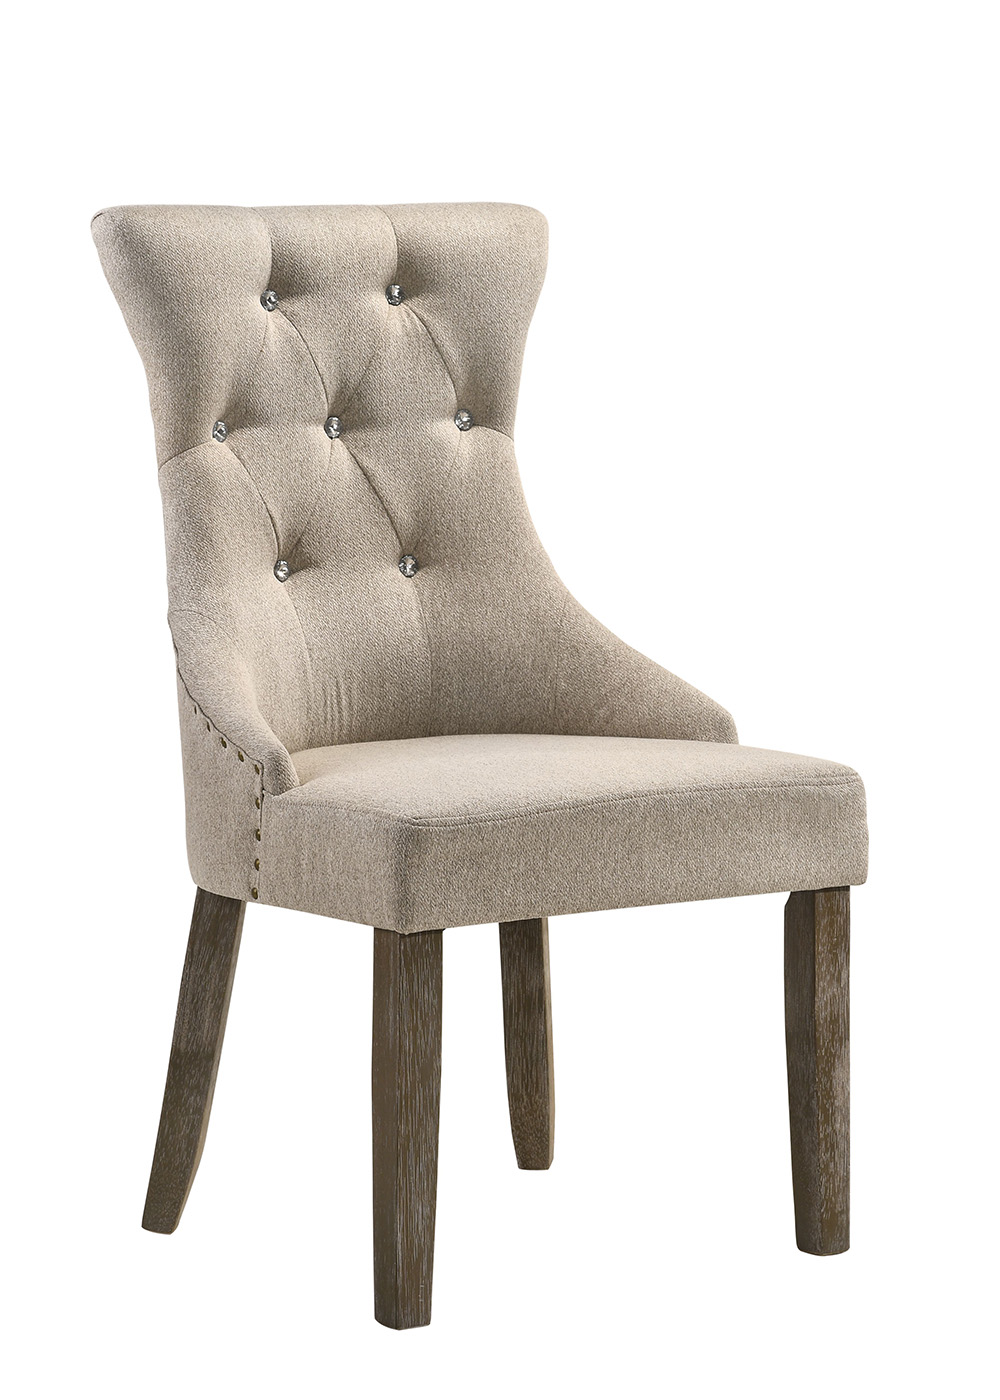 ACME Gabrian Fabric Upholstered Dining Chair Set of 2, with Button Tufted Backrest, and Wood Legs, for Restaurant, Cafe, Tavern, Office, Living Room - Gray